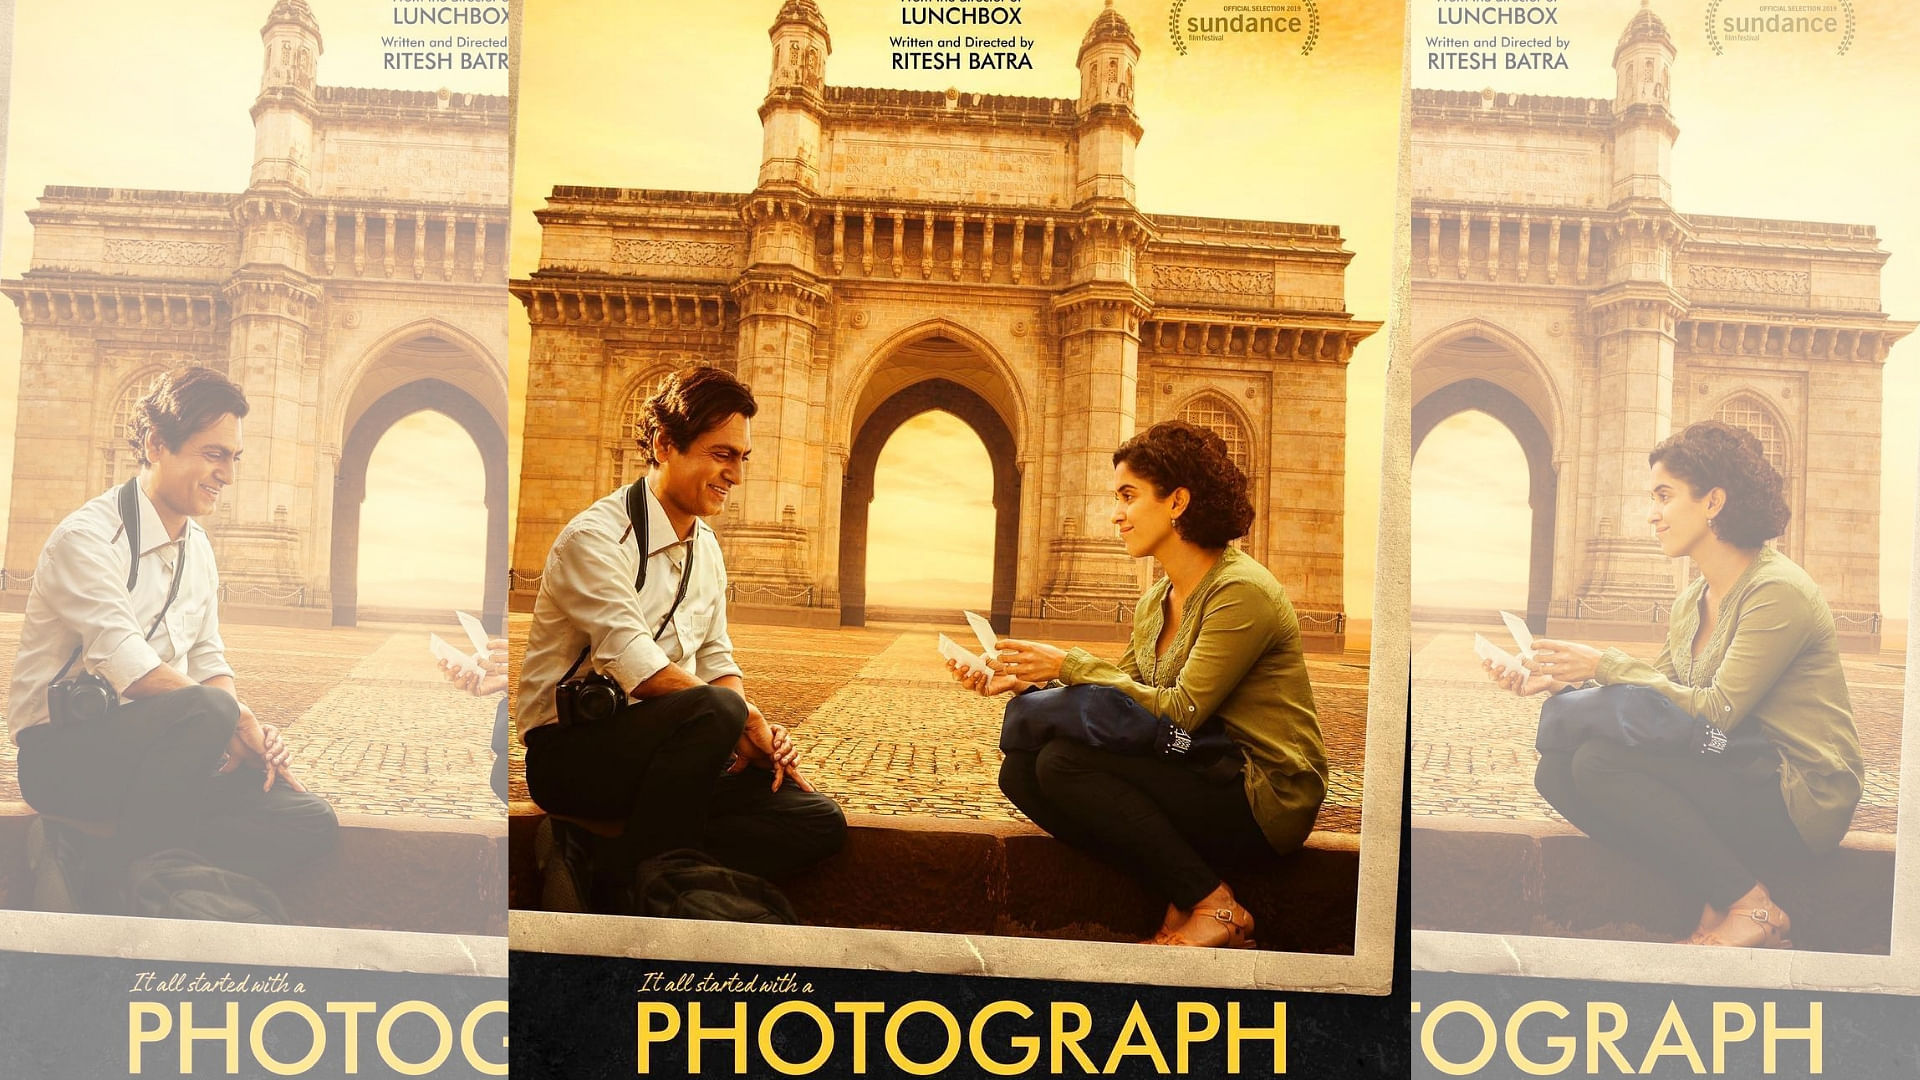 <i>Photograph </i>is set against the backdrop of a very tourist-y Mumbai city.